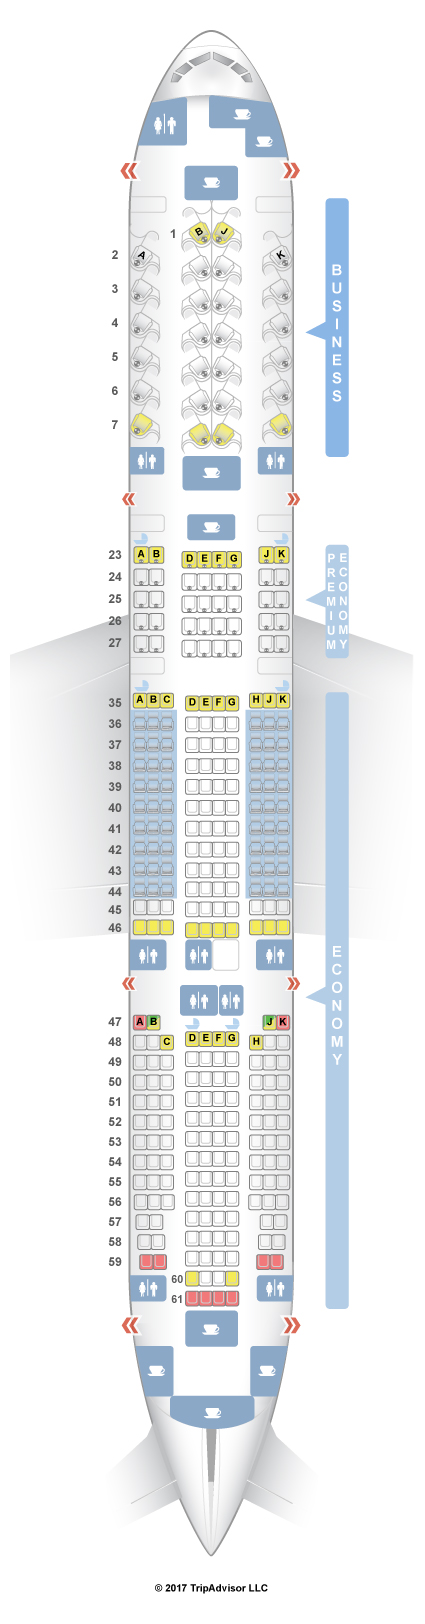 Air New Zealand 777 200 Seating Chart